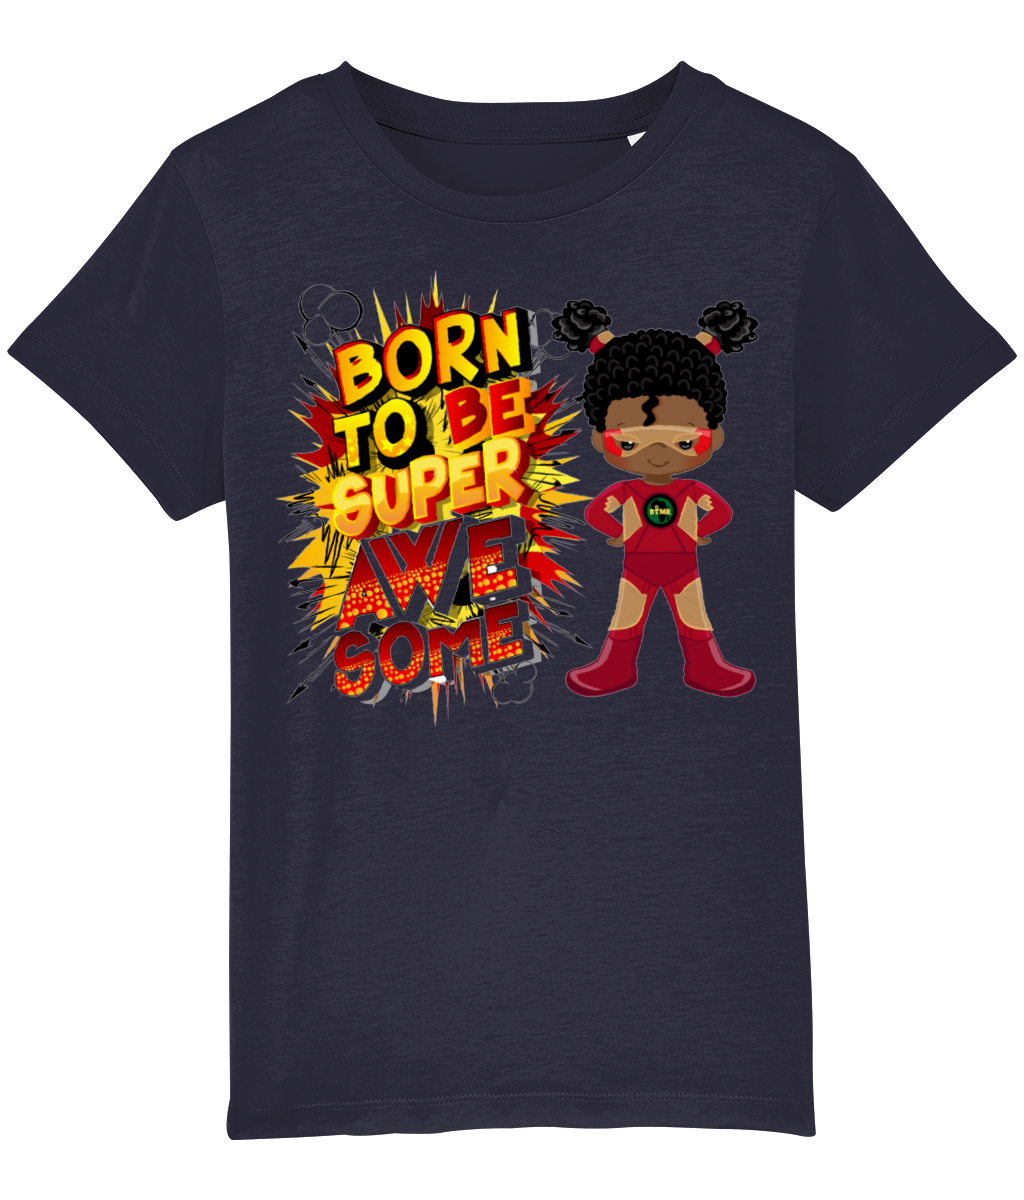 Born To Be Awesome Girls Super Heroine T Shirt